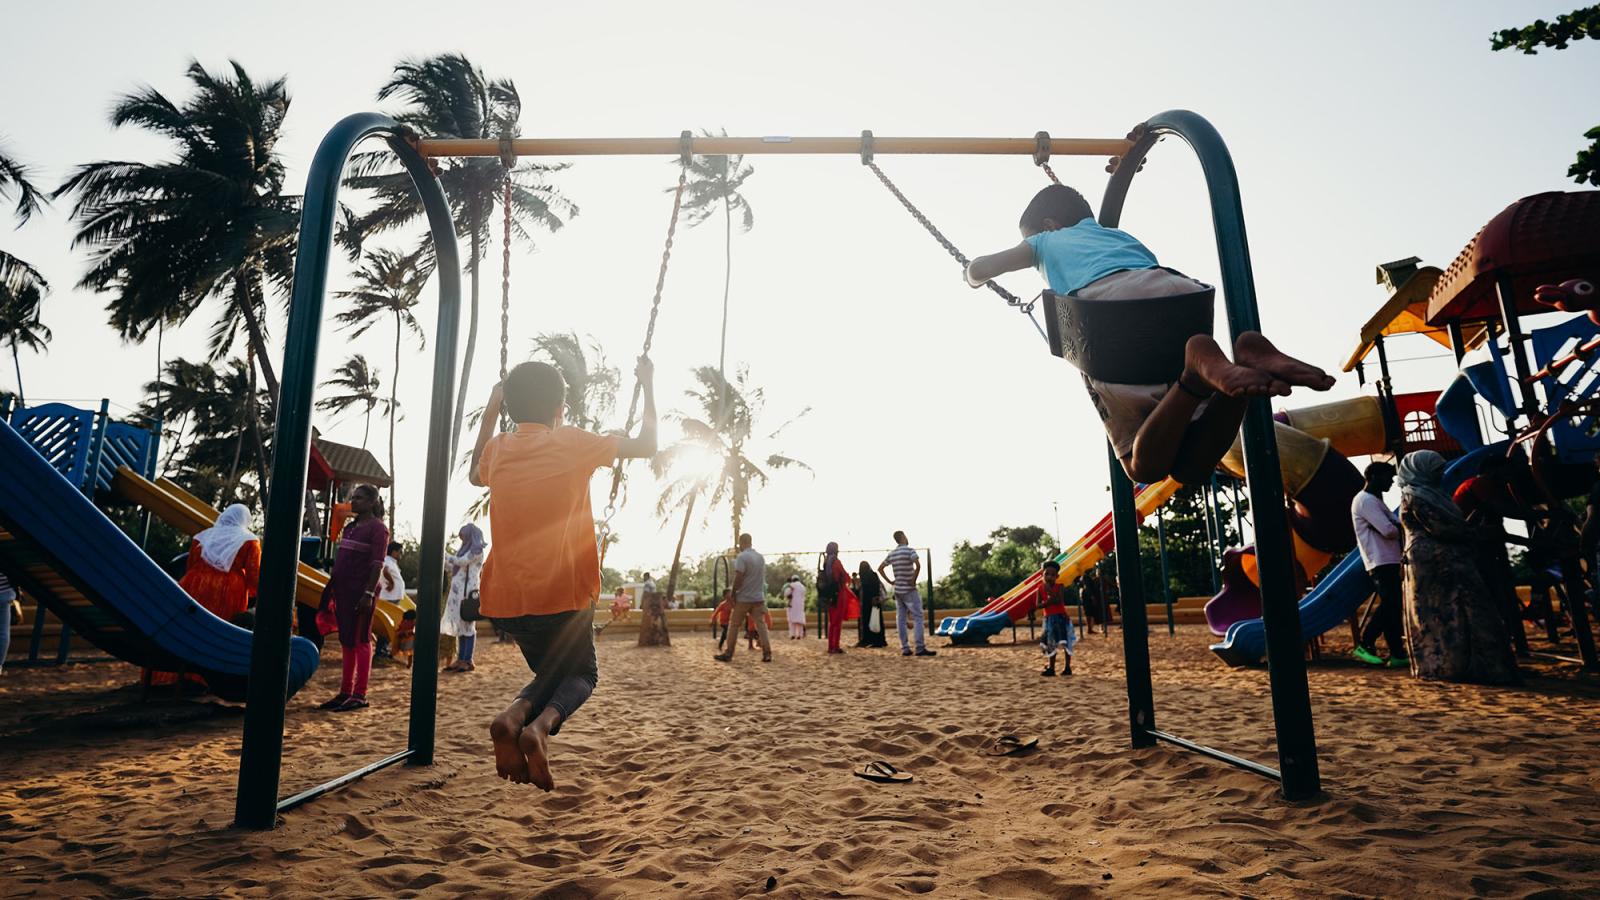 children on a swingset at sunset with palm trees in the background